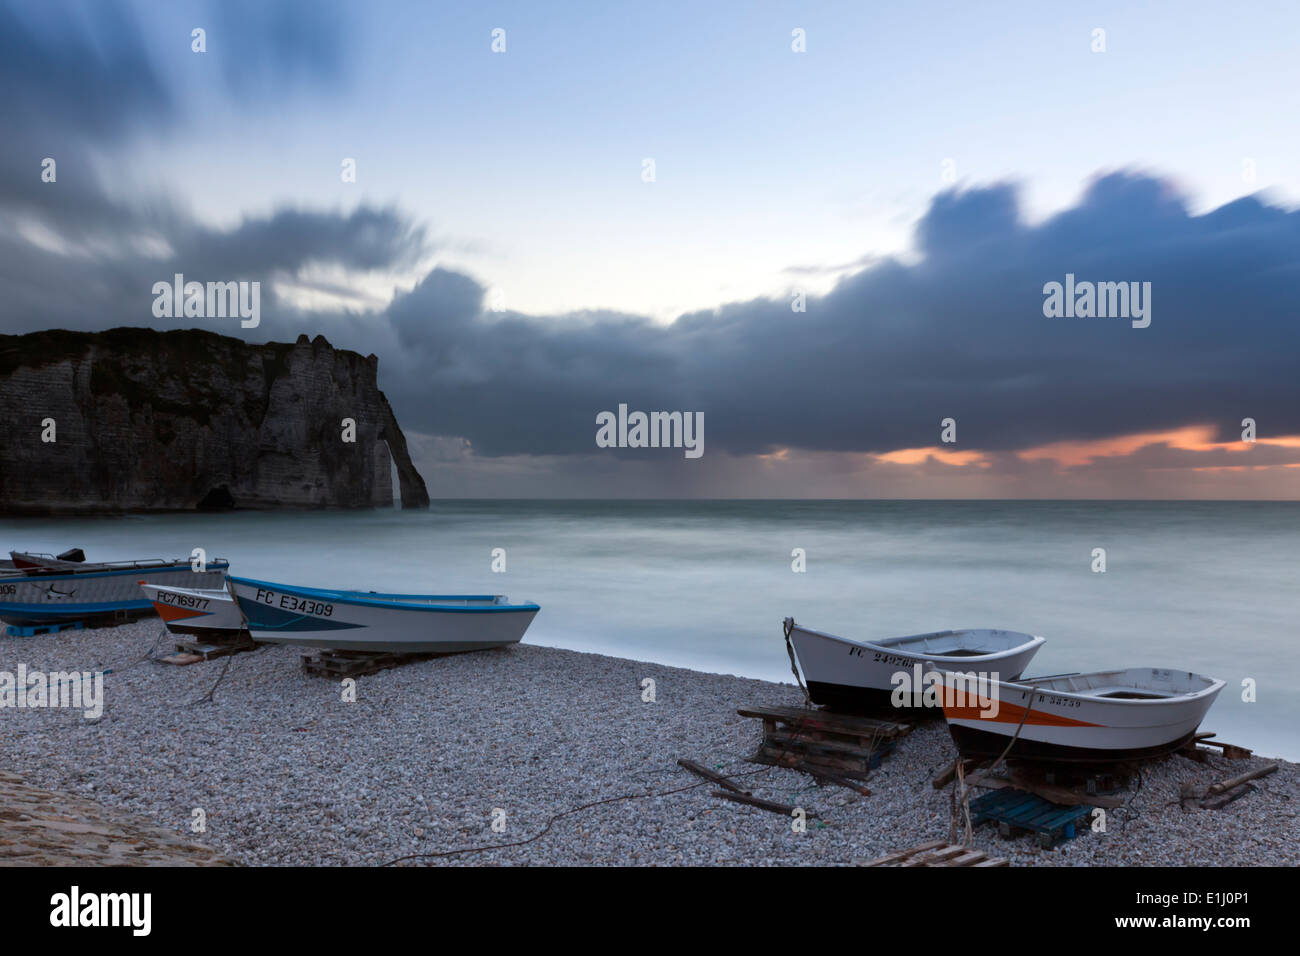 Boats on the beach of Etretat, Normandy, at sunset. Porte d'Aval natural arch in background. Long exposure. Stock Photo